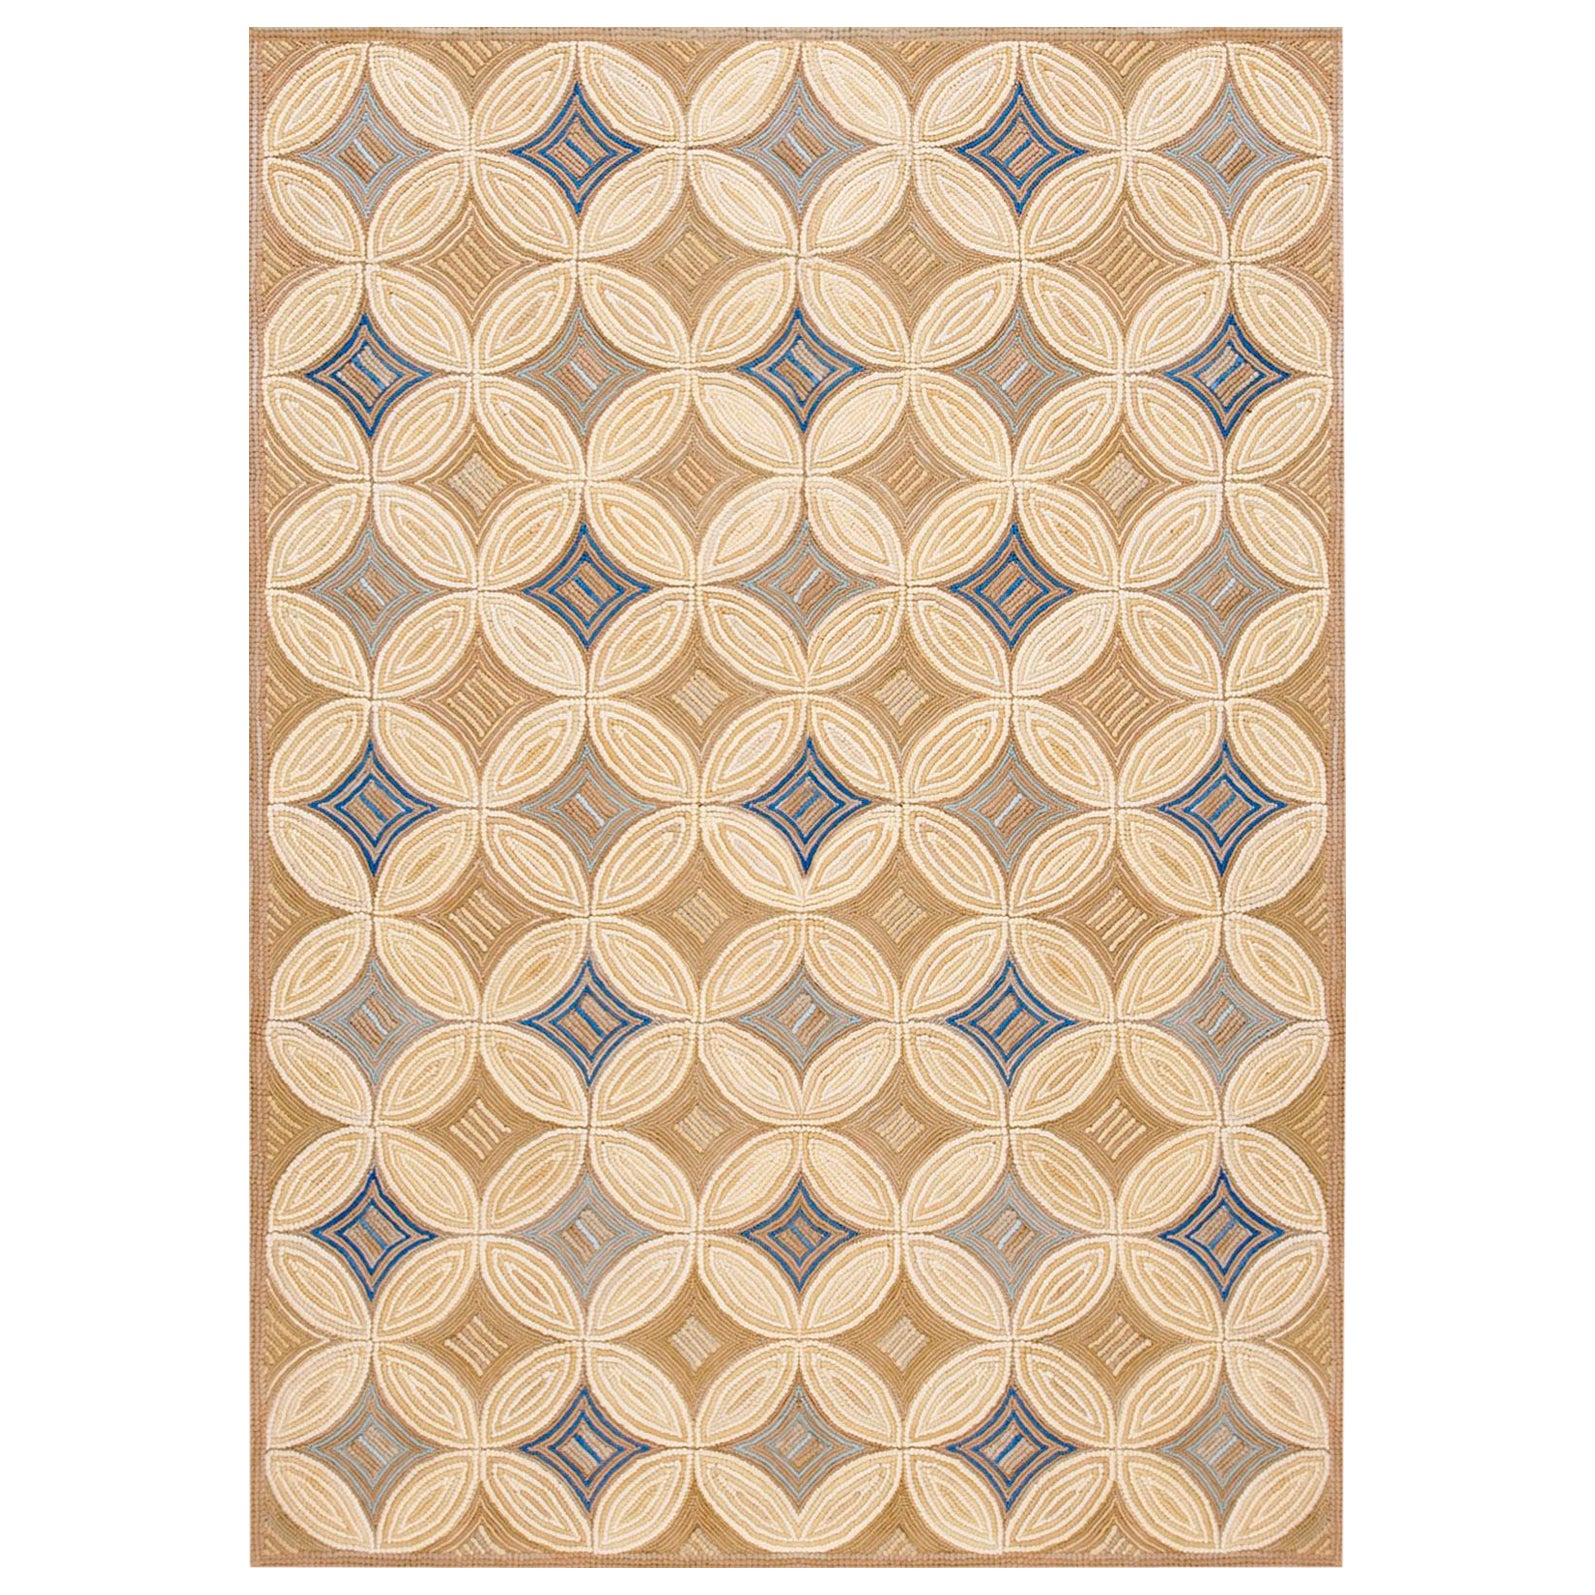 Contemporary Cotton Hooked Rug ( 6' x 9' - 183 x 275 ) For Sale